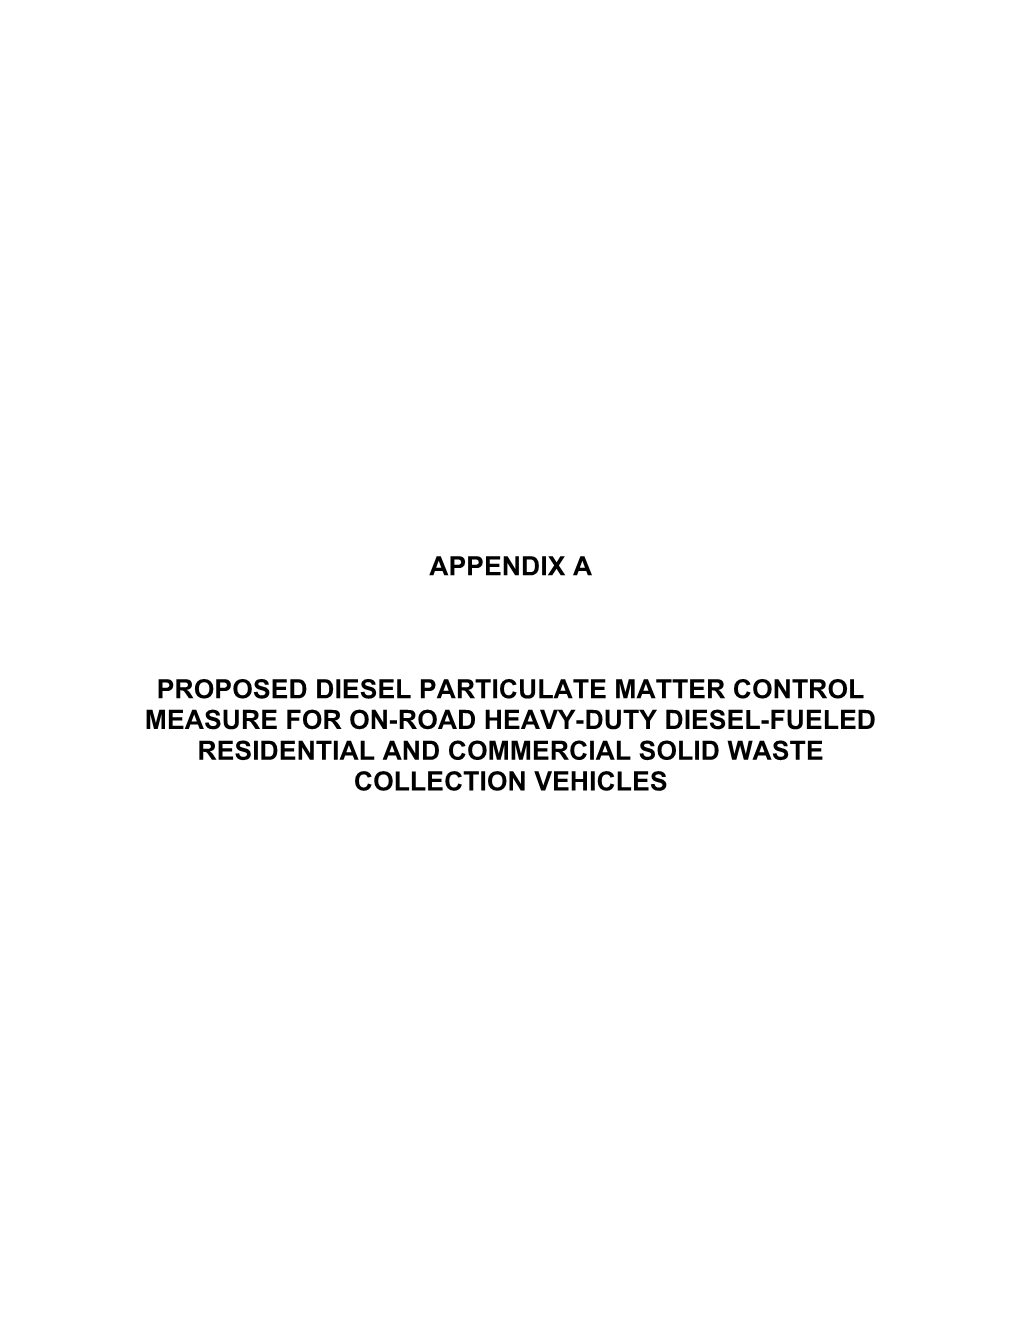 Section 2020 Purpose and Definitions for Diesel Particulate Matter Control Measures